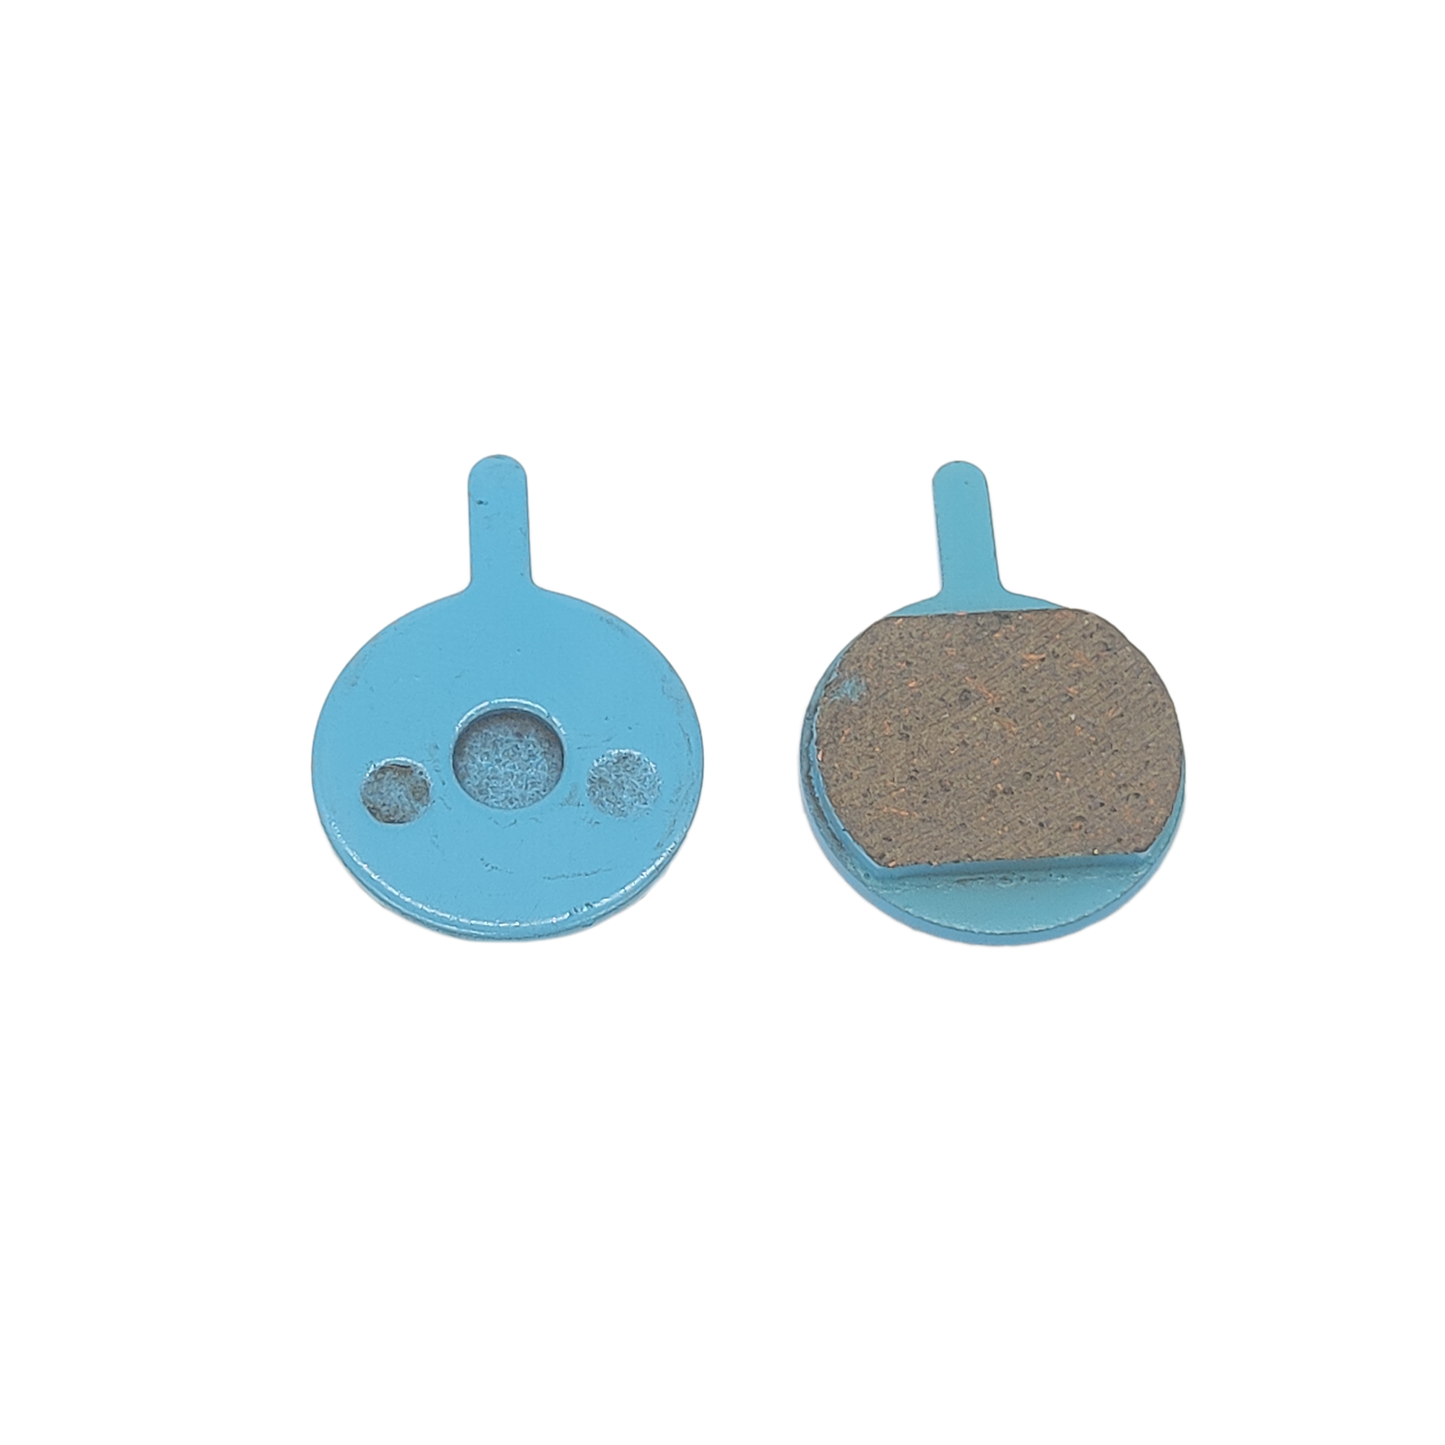 Ceramic brake pad for e-scooters, bicycles, e-bikes